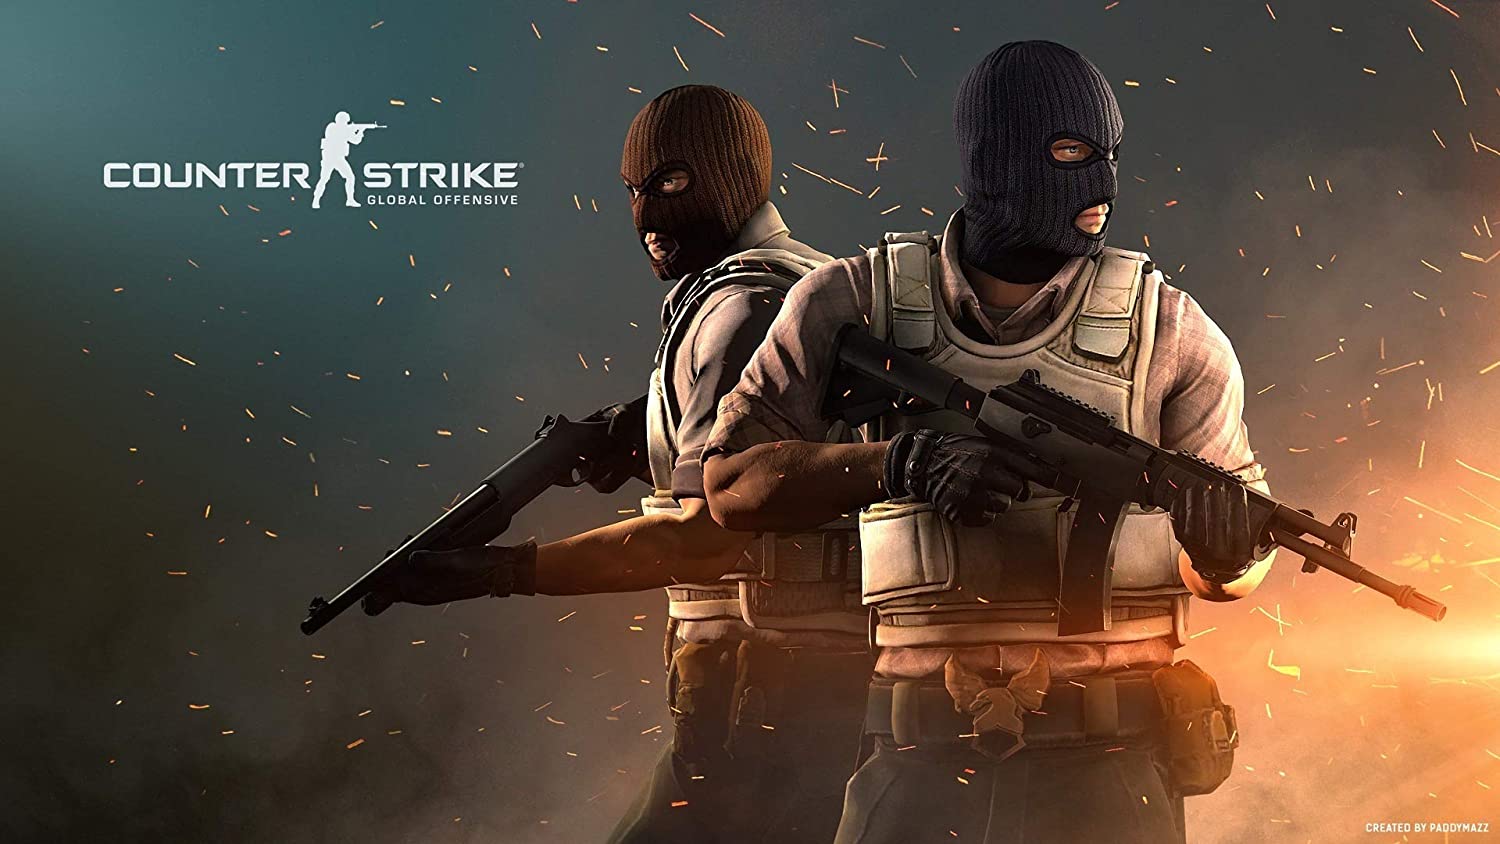 Learn How to Earn Free Skins on CSGO - Giveaway Guide